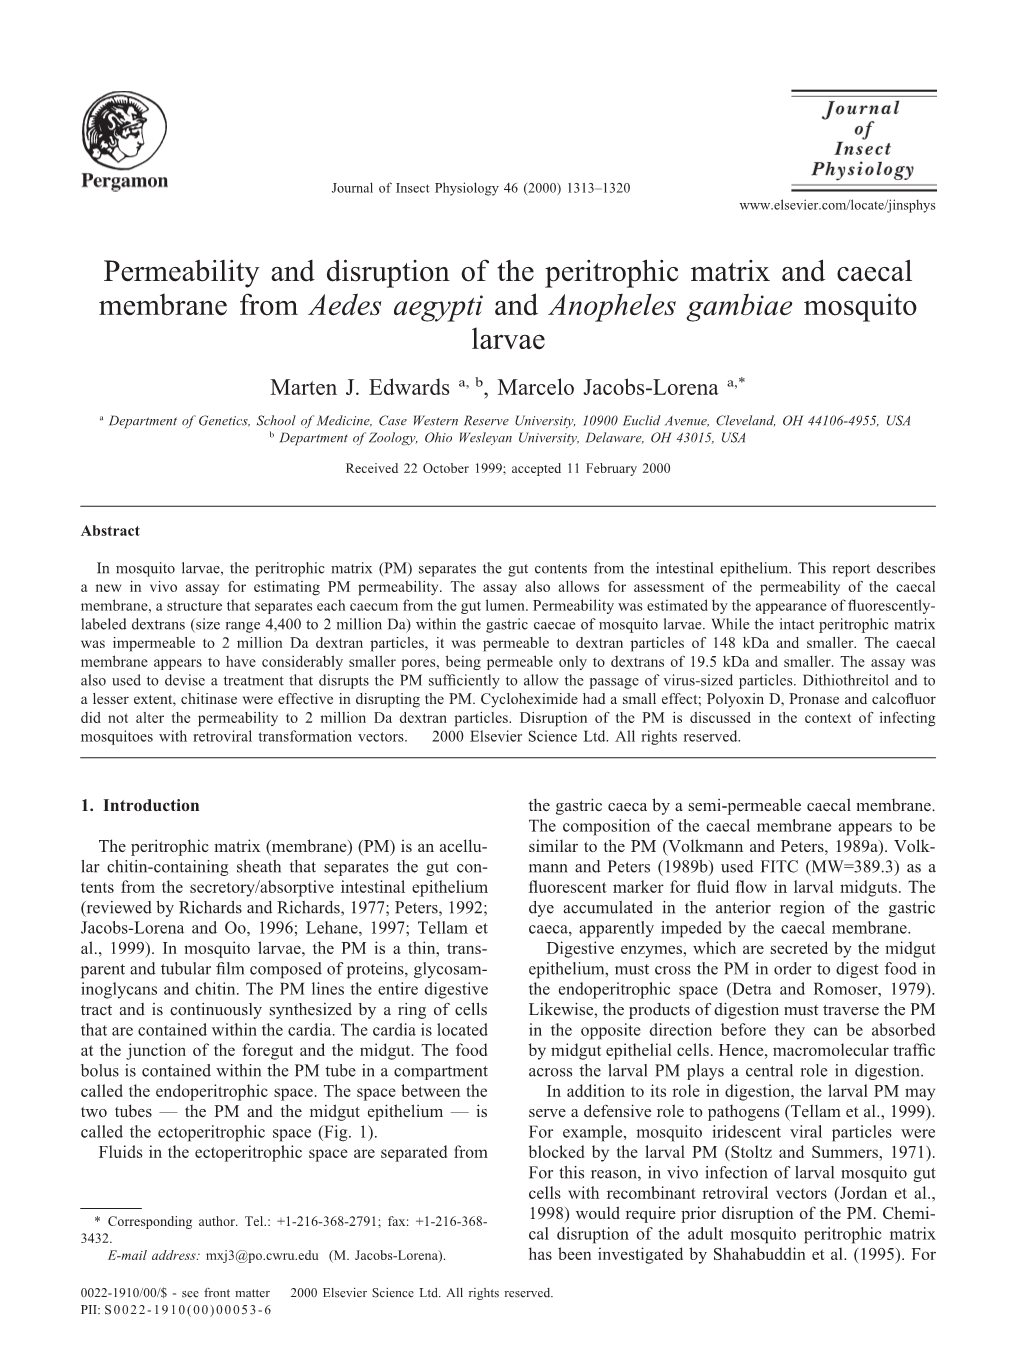 Permeability and Disruption of the Peritrophic Matrix and Caecal Membrane from Aedes Aegypti and Anopheles Gambiae Mosquito Larvae Marten J